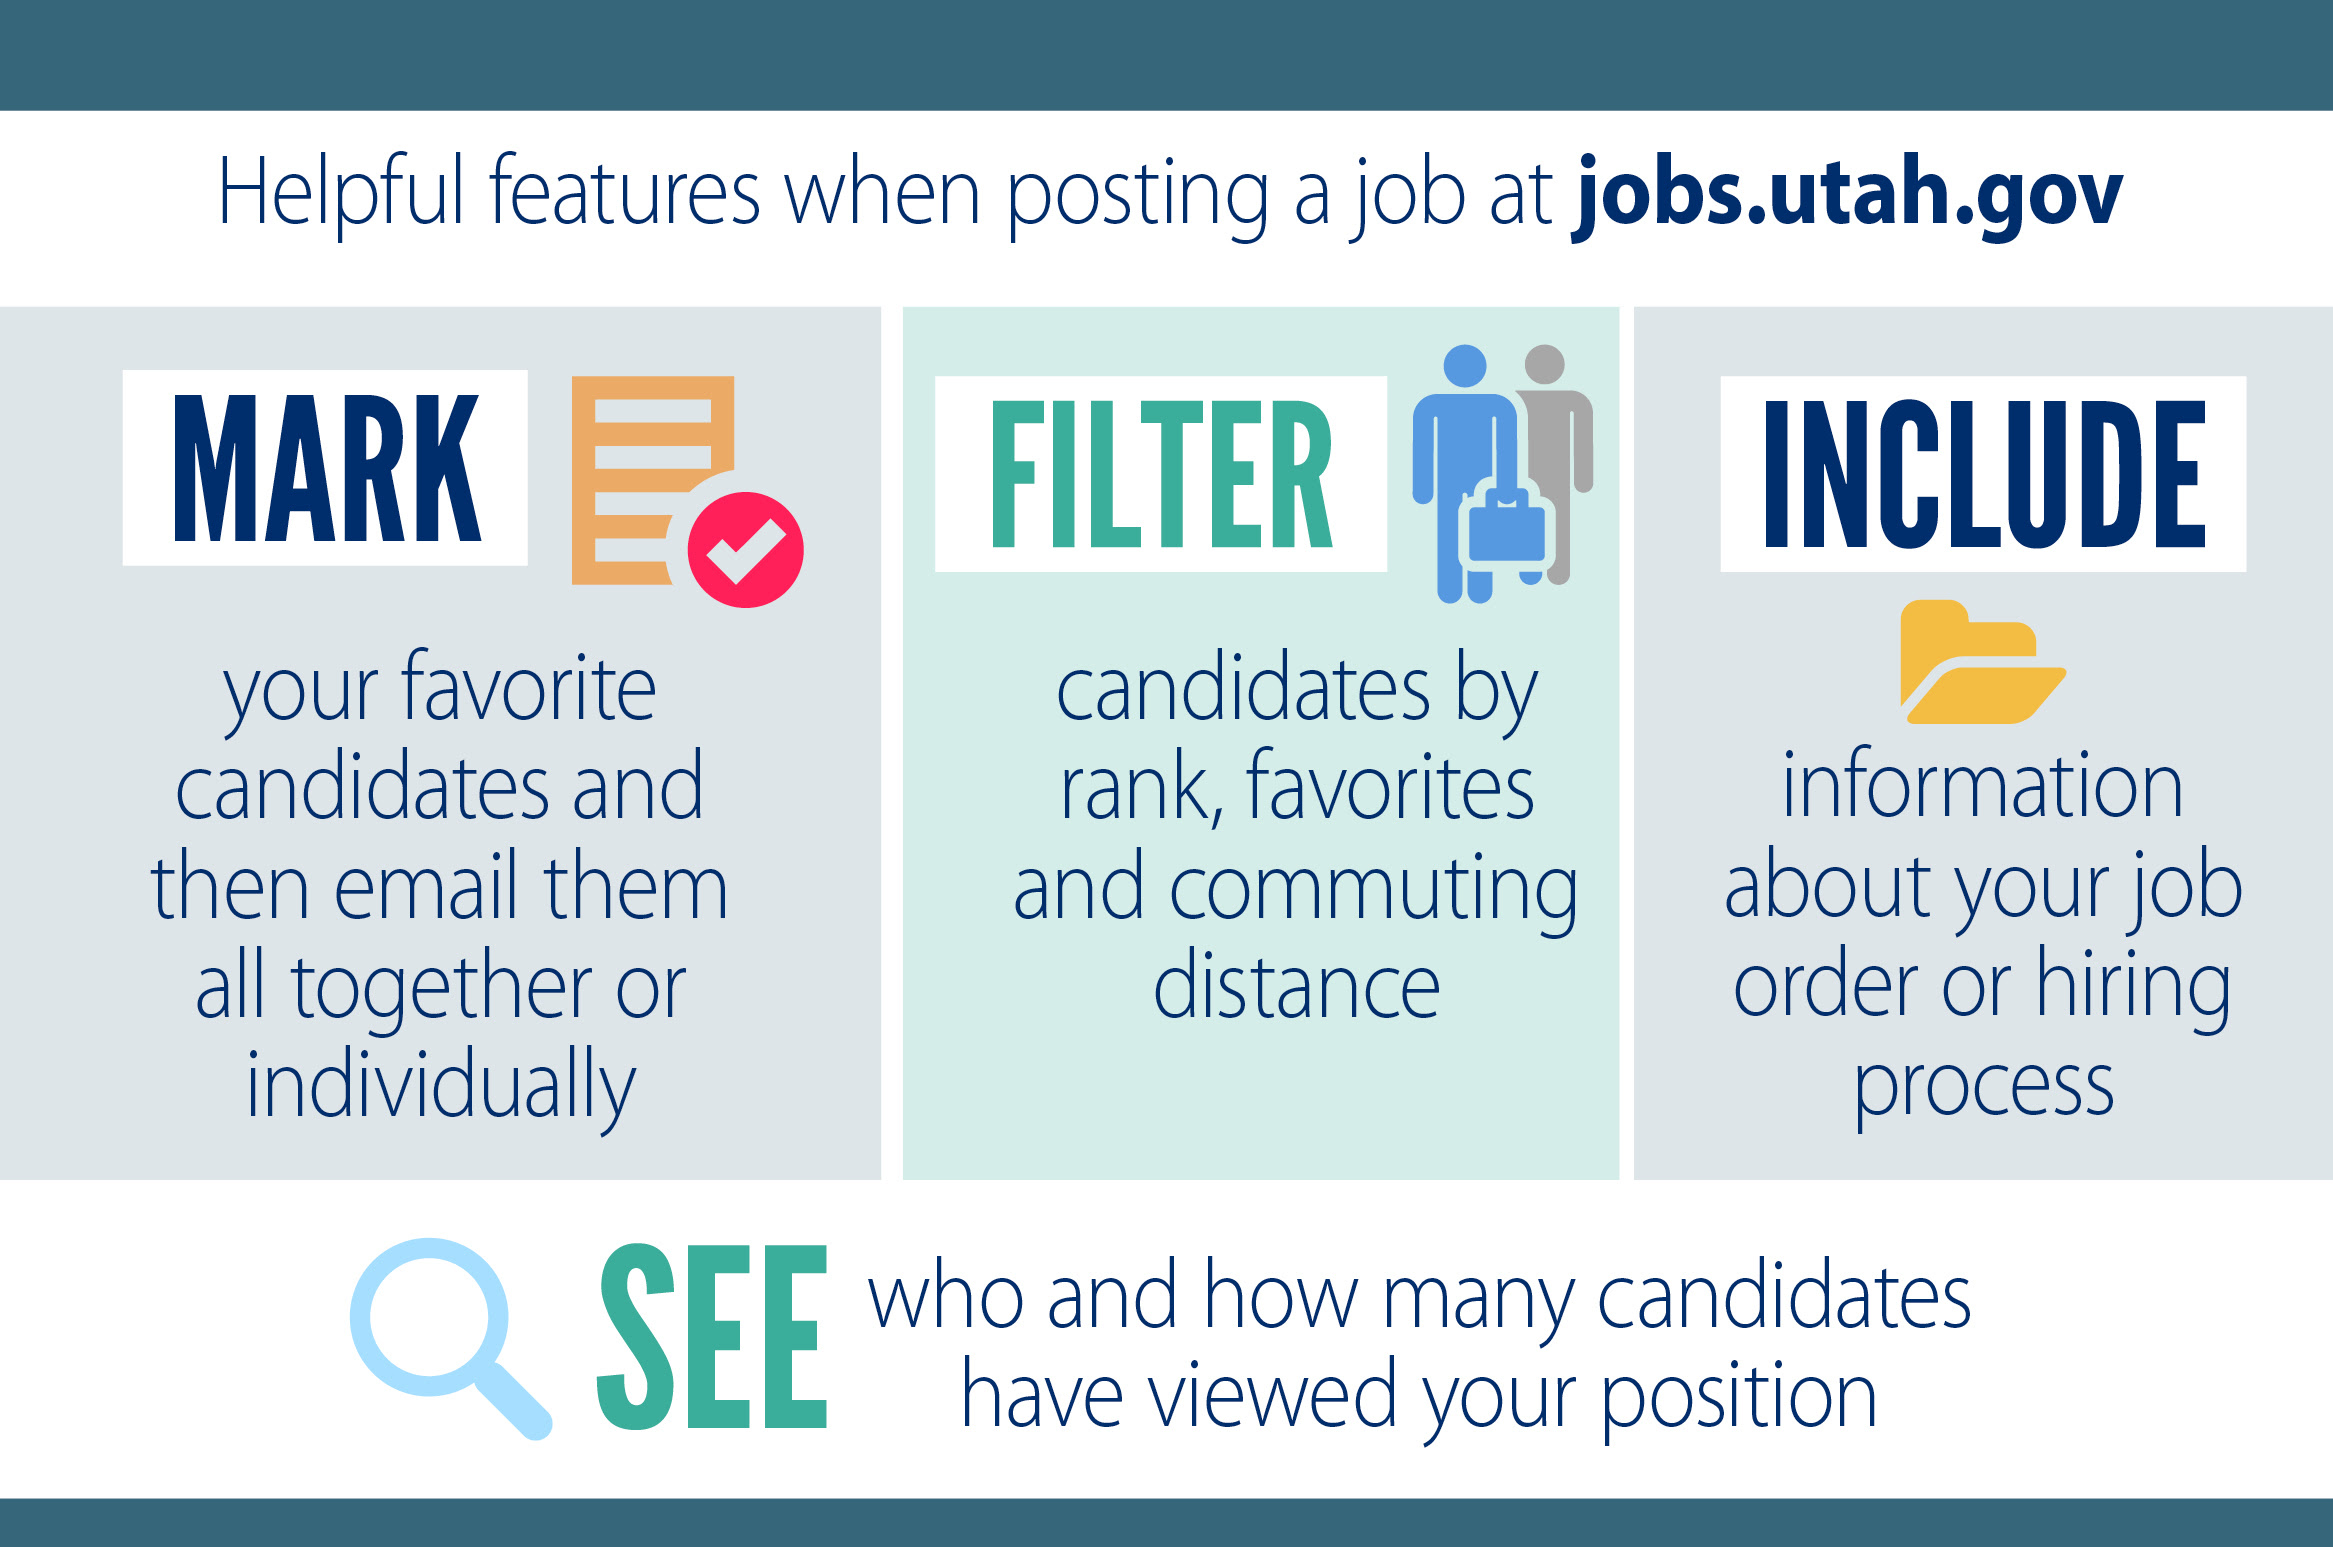 Helpful features when posting at jobs.utah.gov. Mark your favorite candidates and then email them all together or individually. Filter candidates by rank, favorites and commuting distance. Include information about your job order or hiring processes. See who and how many candidates have viewed your position.